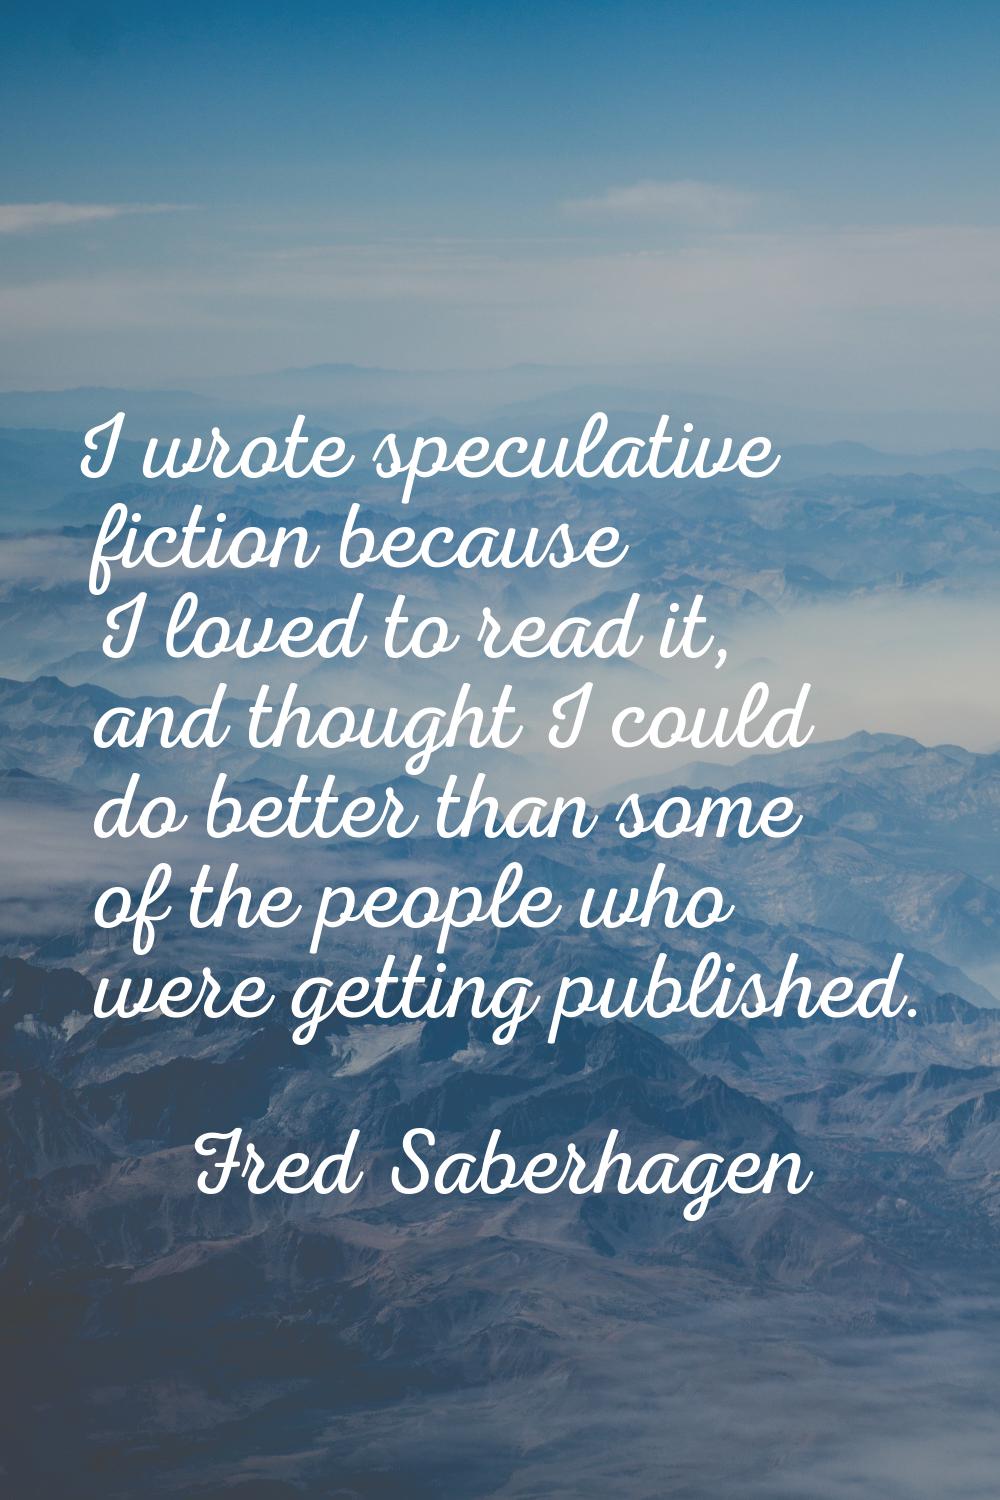 I wrote speculative fiction because I loved to read it, and thought I could do better than some of 